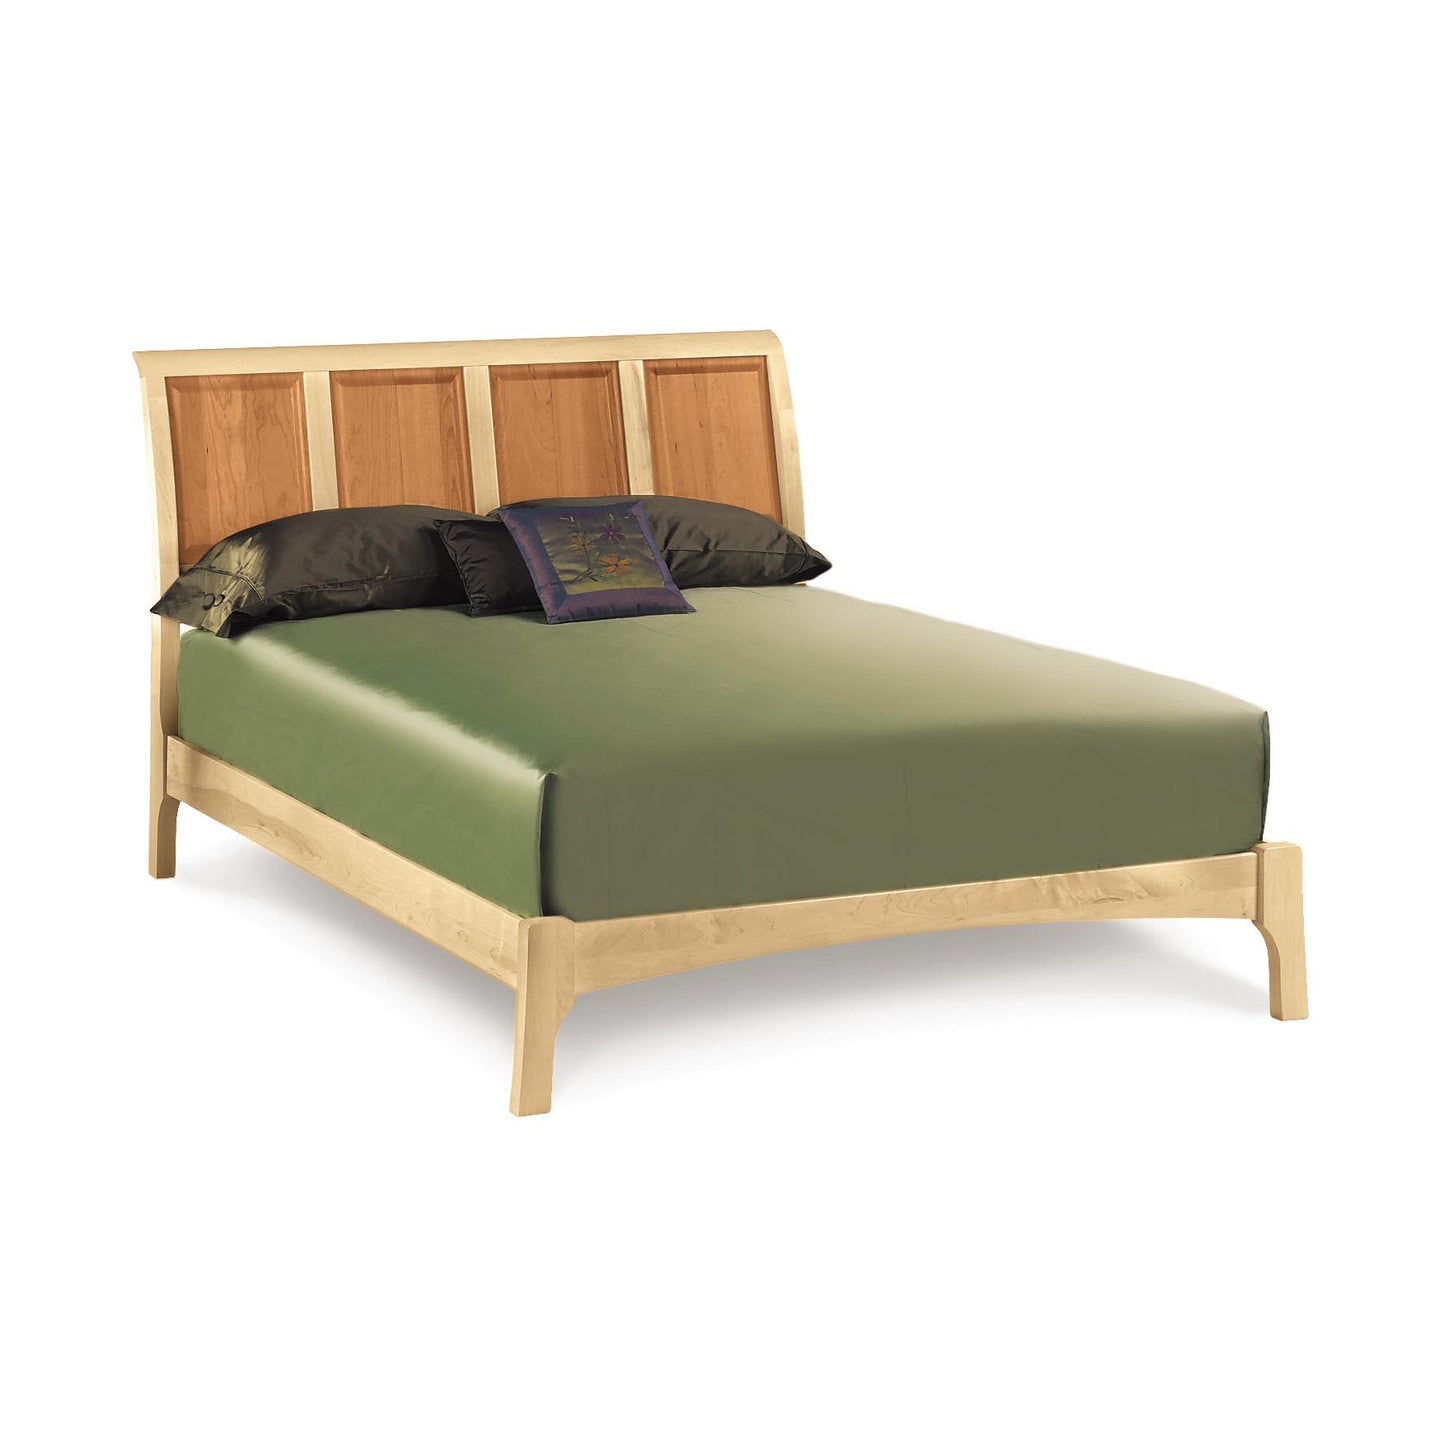 An eco-friendly Sarah Low Footboard Sleigh Bed by Copeland Furniture with a green sheet.